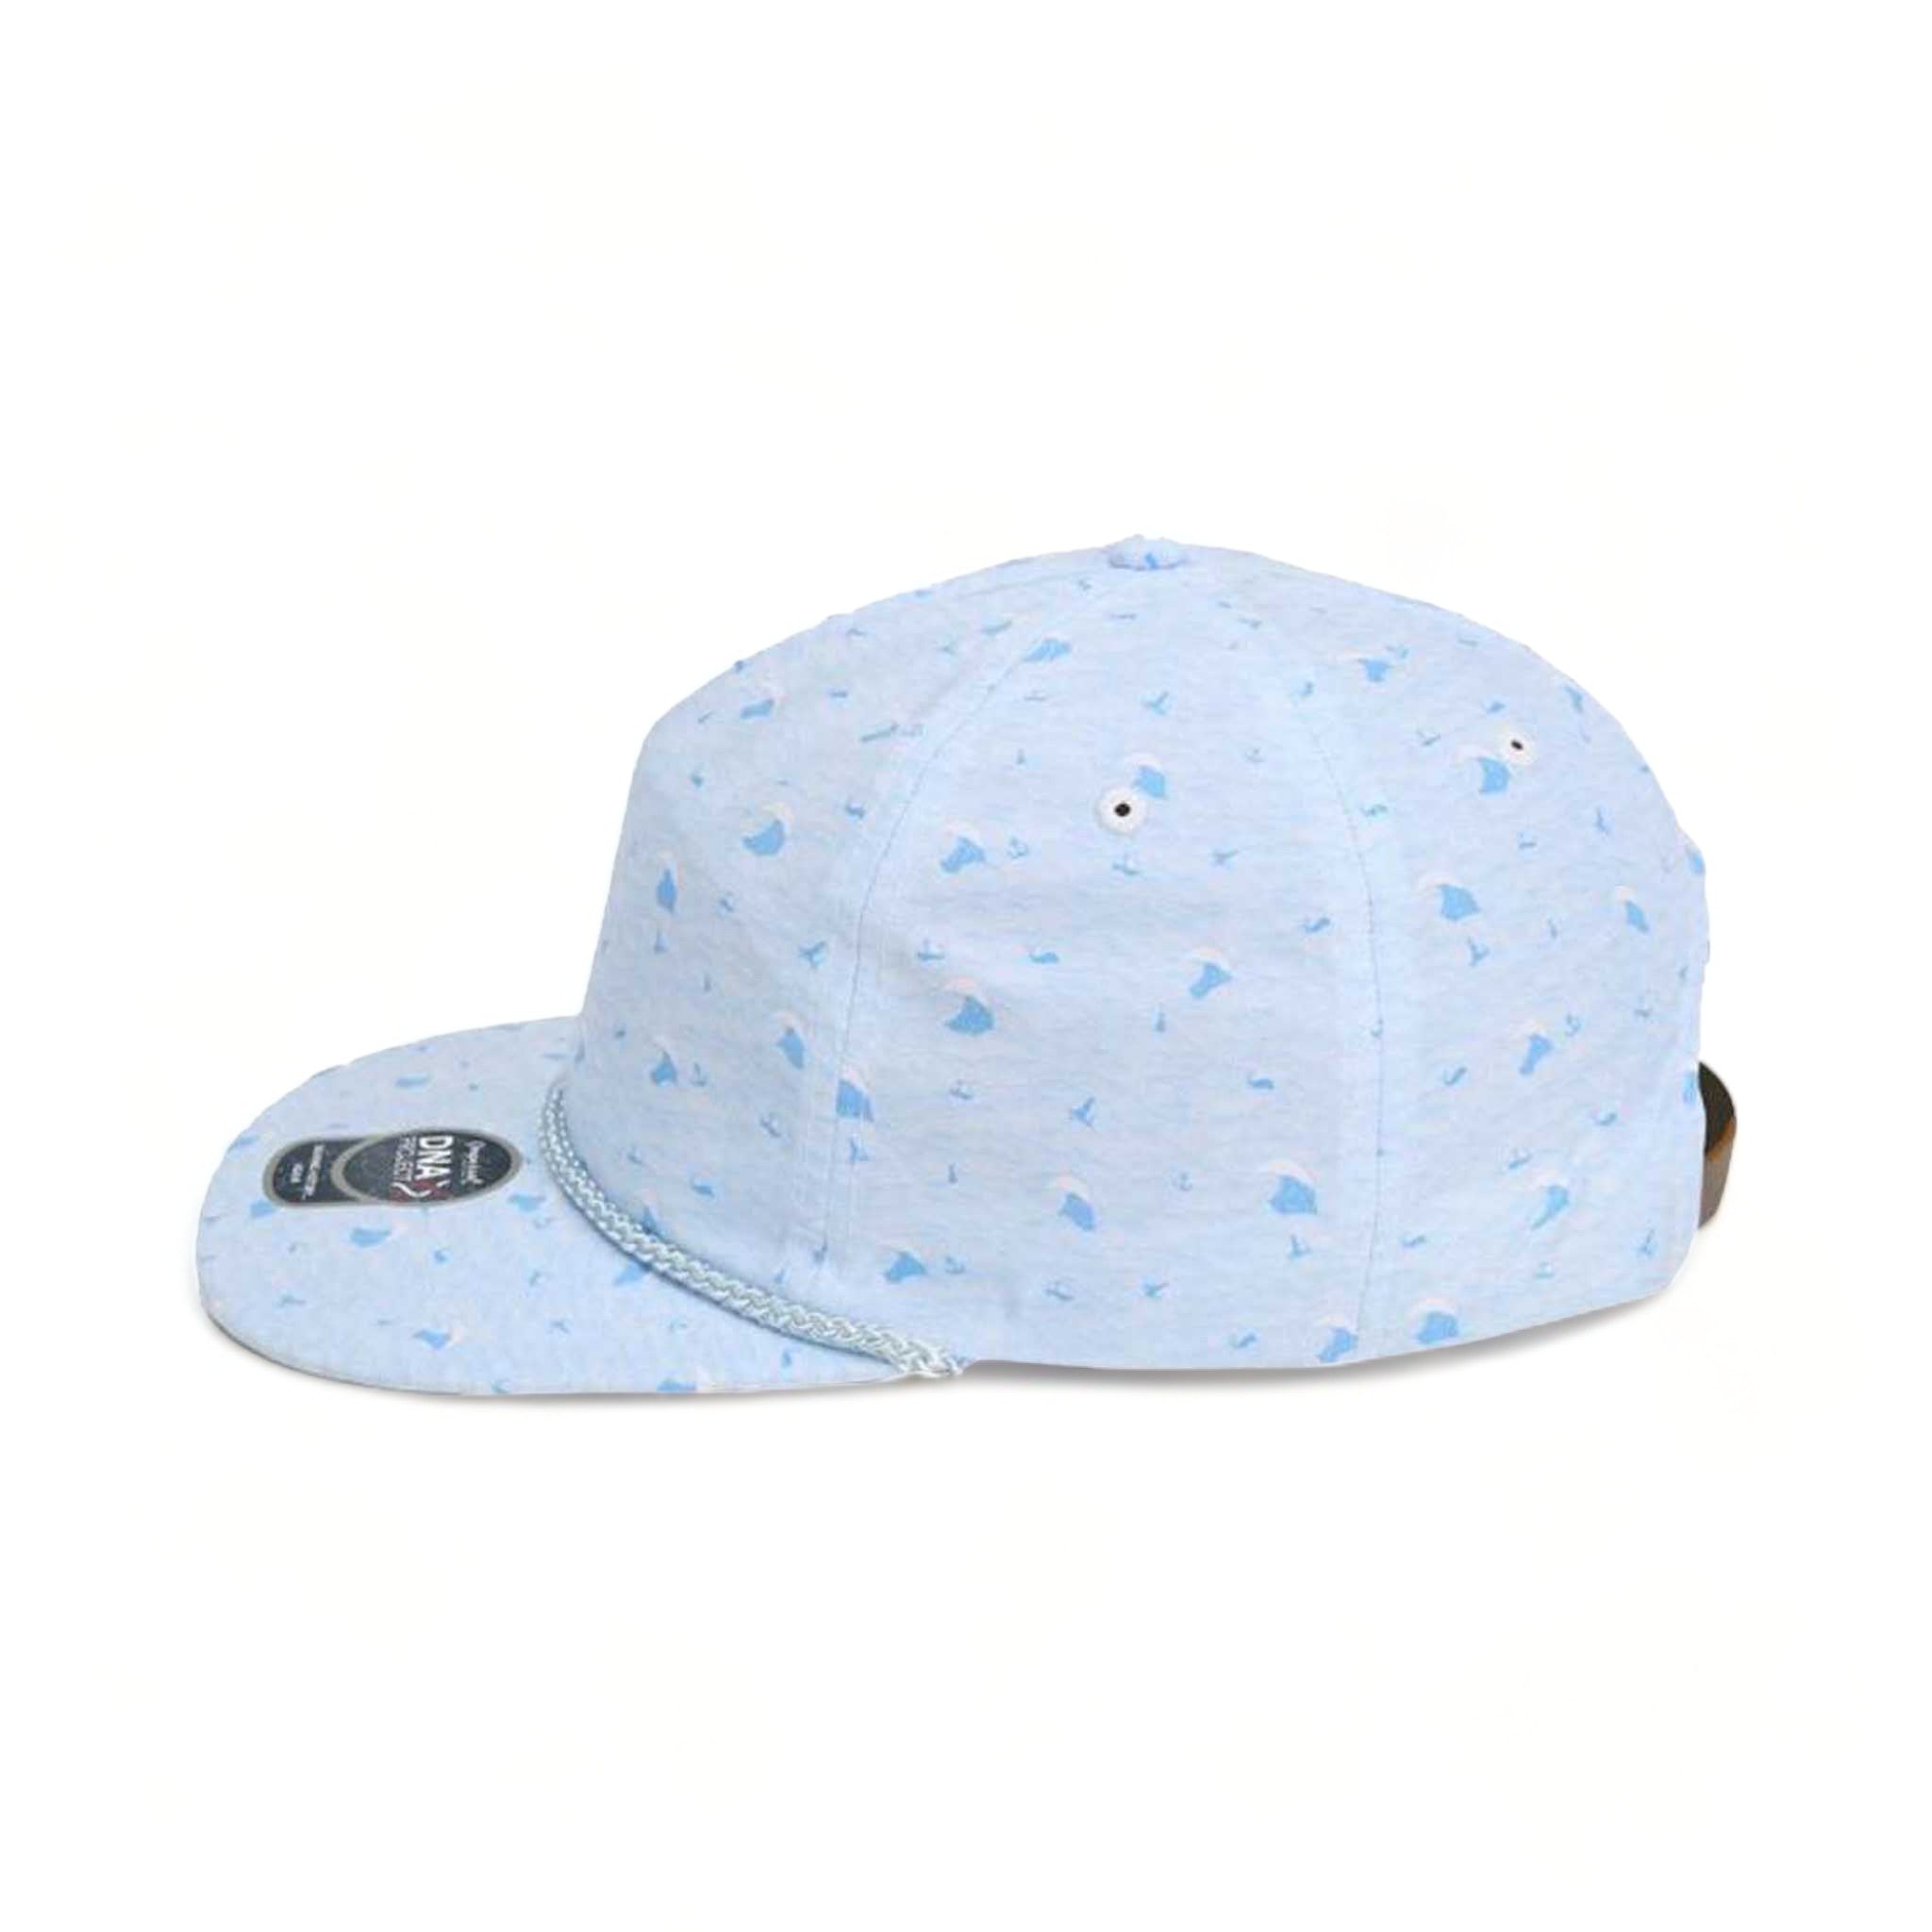 Side view of Imperial DNA010 custom hat in blue waves